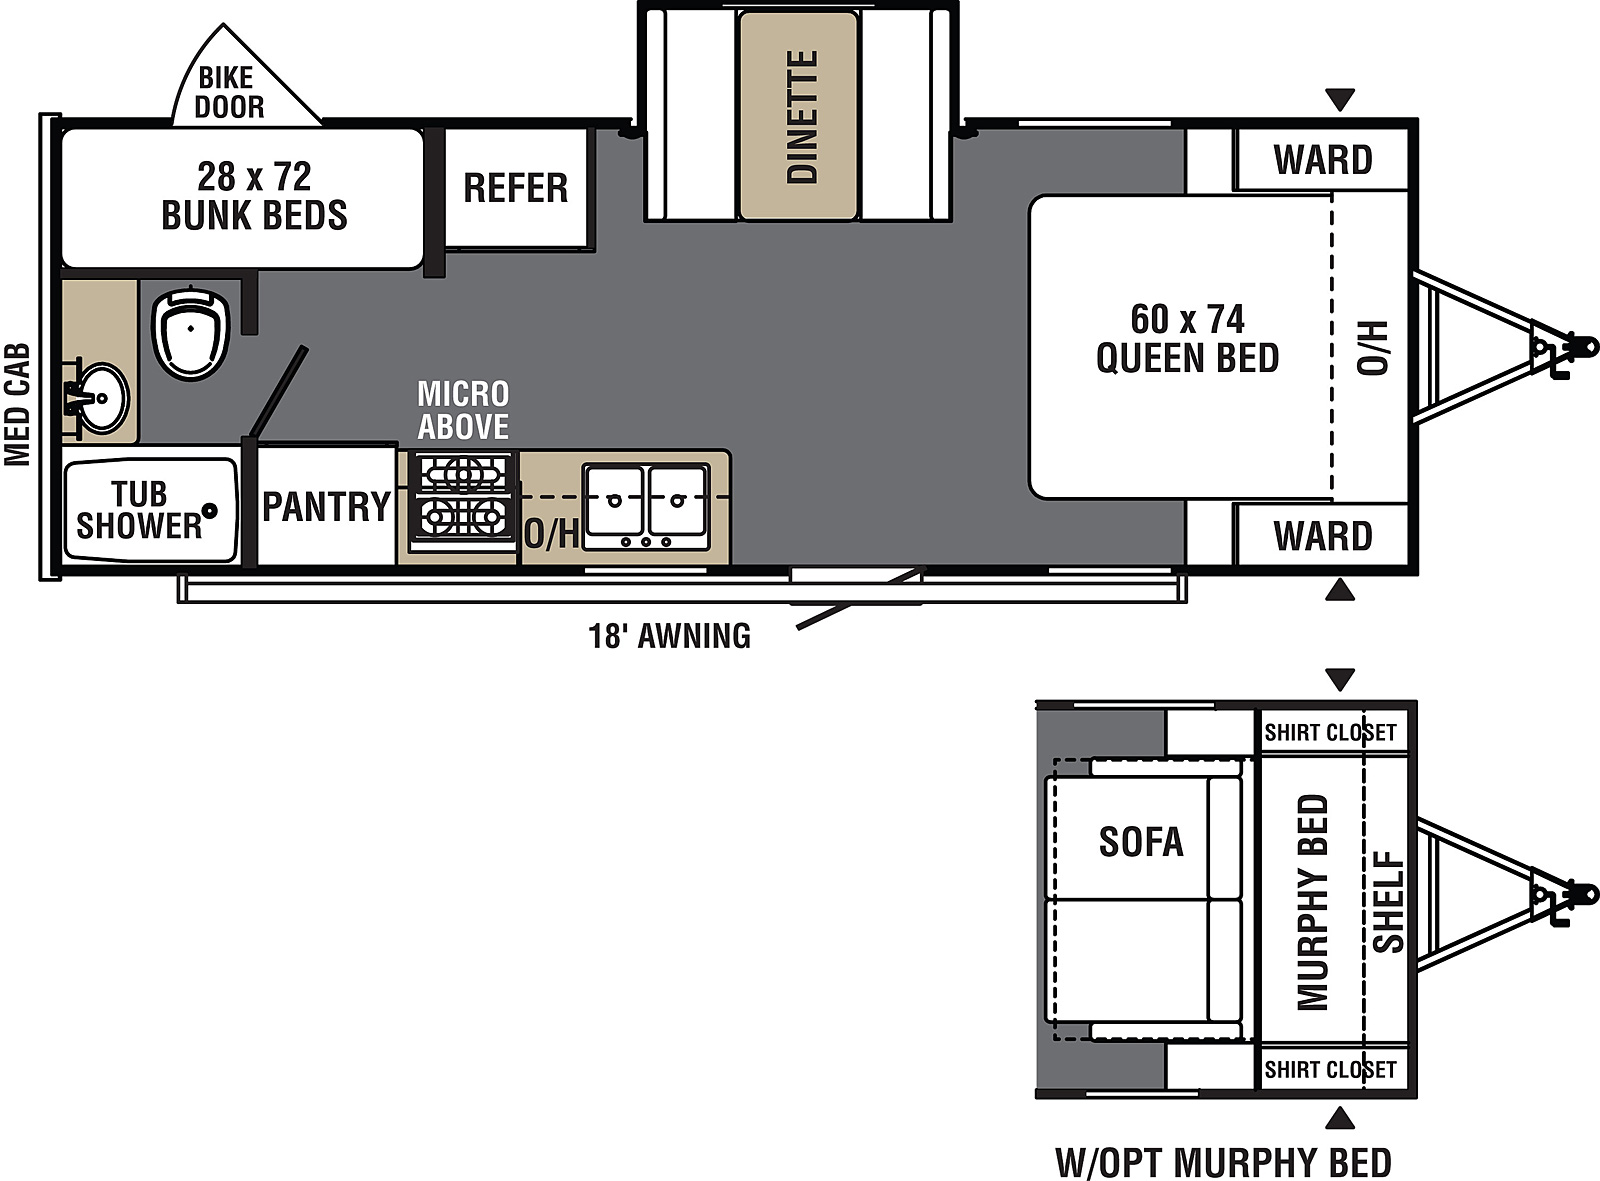 Viking Ultra-Lite 21BHS floorplan. The 21BHS has one slide out and one entry door.